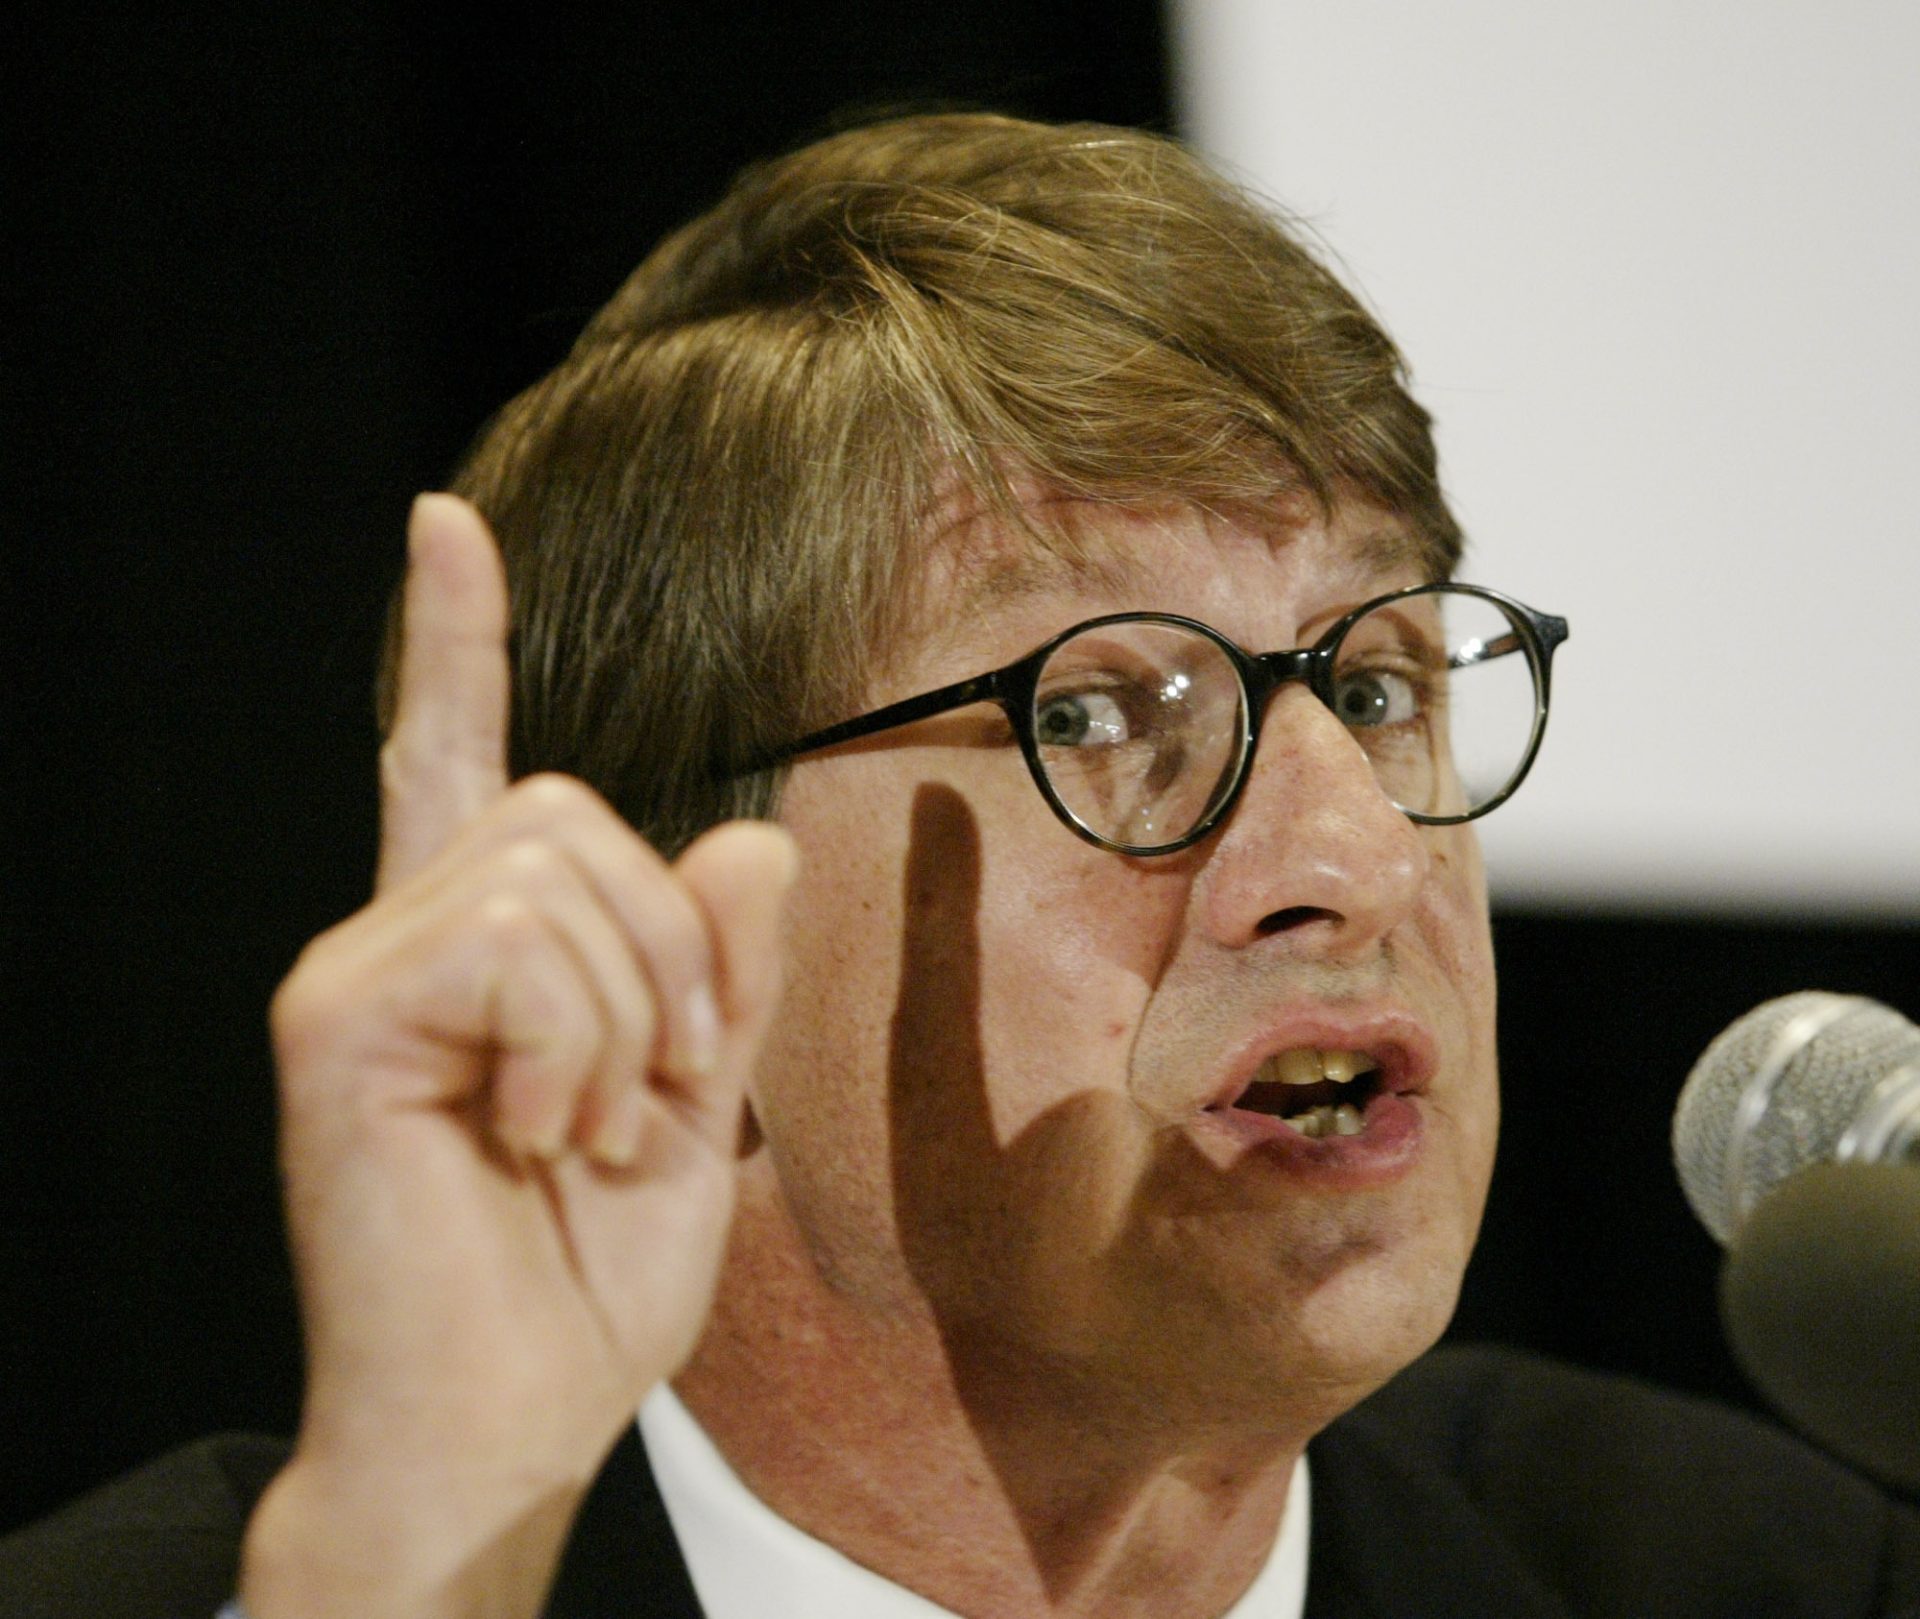 P. J. O'Rourke, author of "Peace Kills: America's Fun New Imperialism", speaks during panel discussion during a luncheon at the Book Expo America convention, Saturday, June 5, 2004, in Chicago.